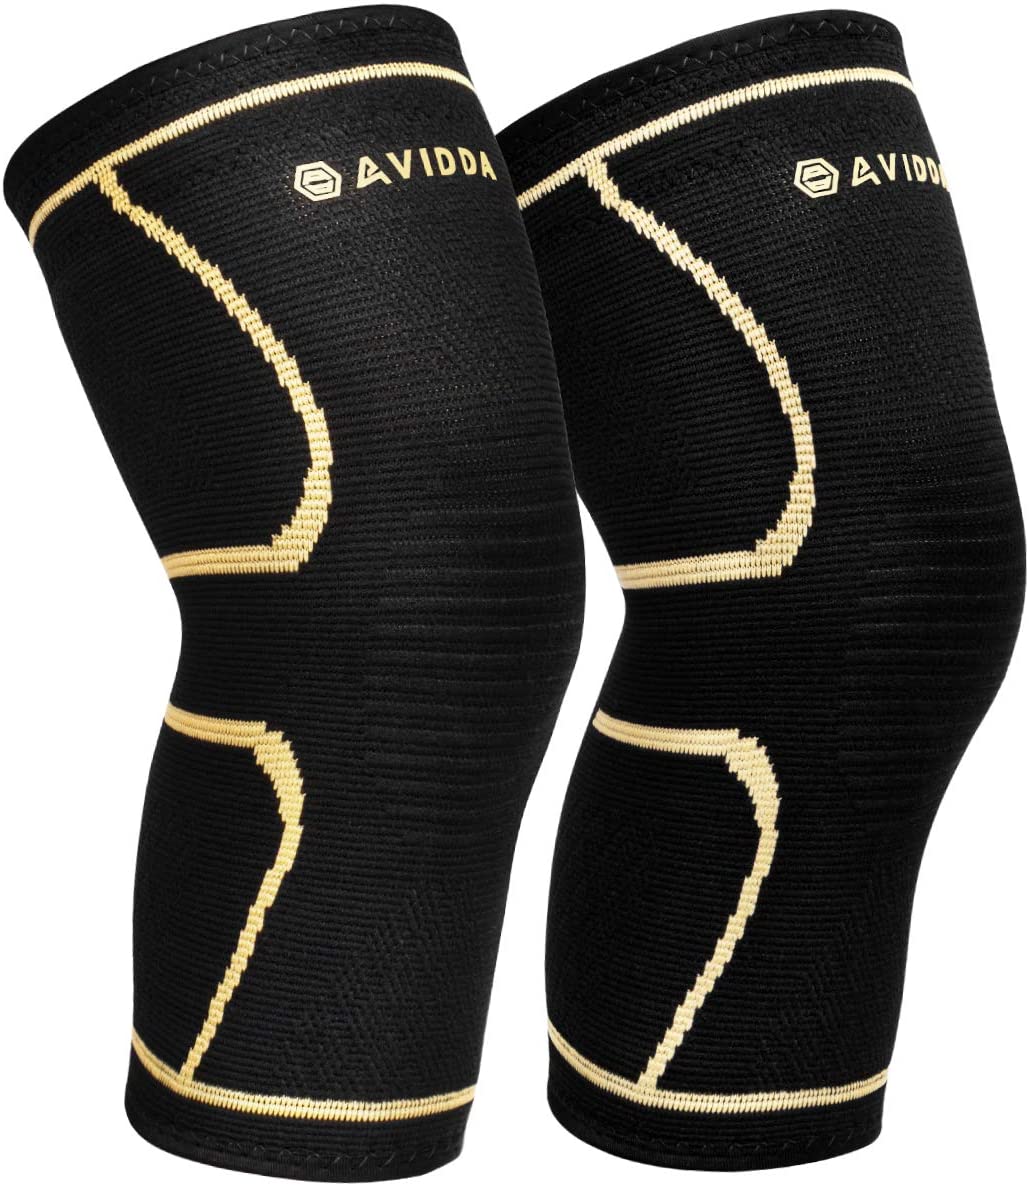 AVIDDA Knee Support Brace 2 Pack - Compression Knee Sleeves for Arthritis,  Joint Pain, Ligament Injury, Meniscus Tear, ACL, MCL, Tendonitis, Running,  Squats, Sports Black Gold XL-Large_Knee Support_Health & Personal  Care_Products_AVIDDA Sport